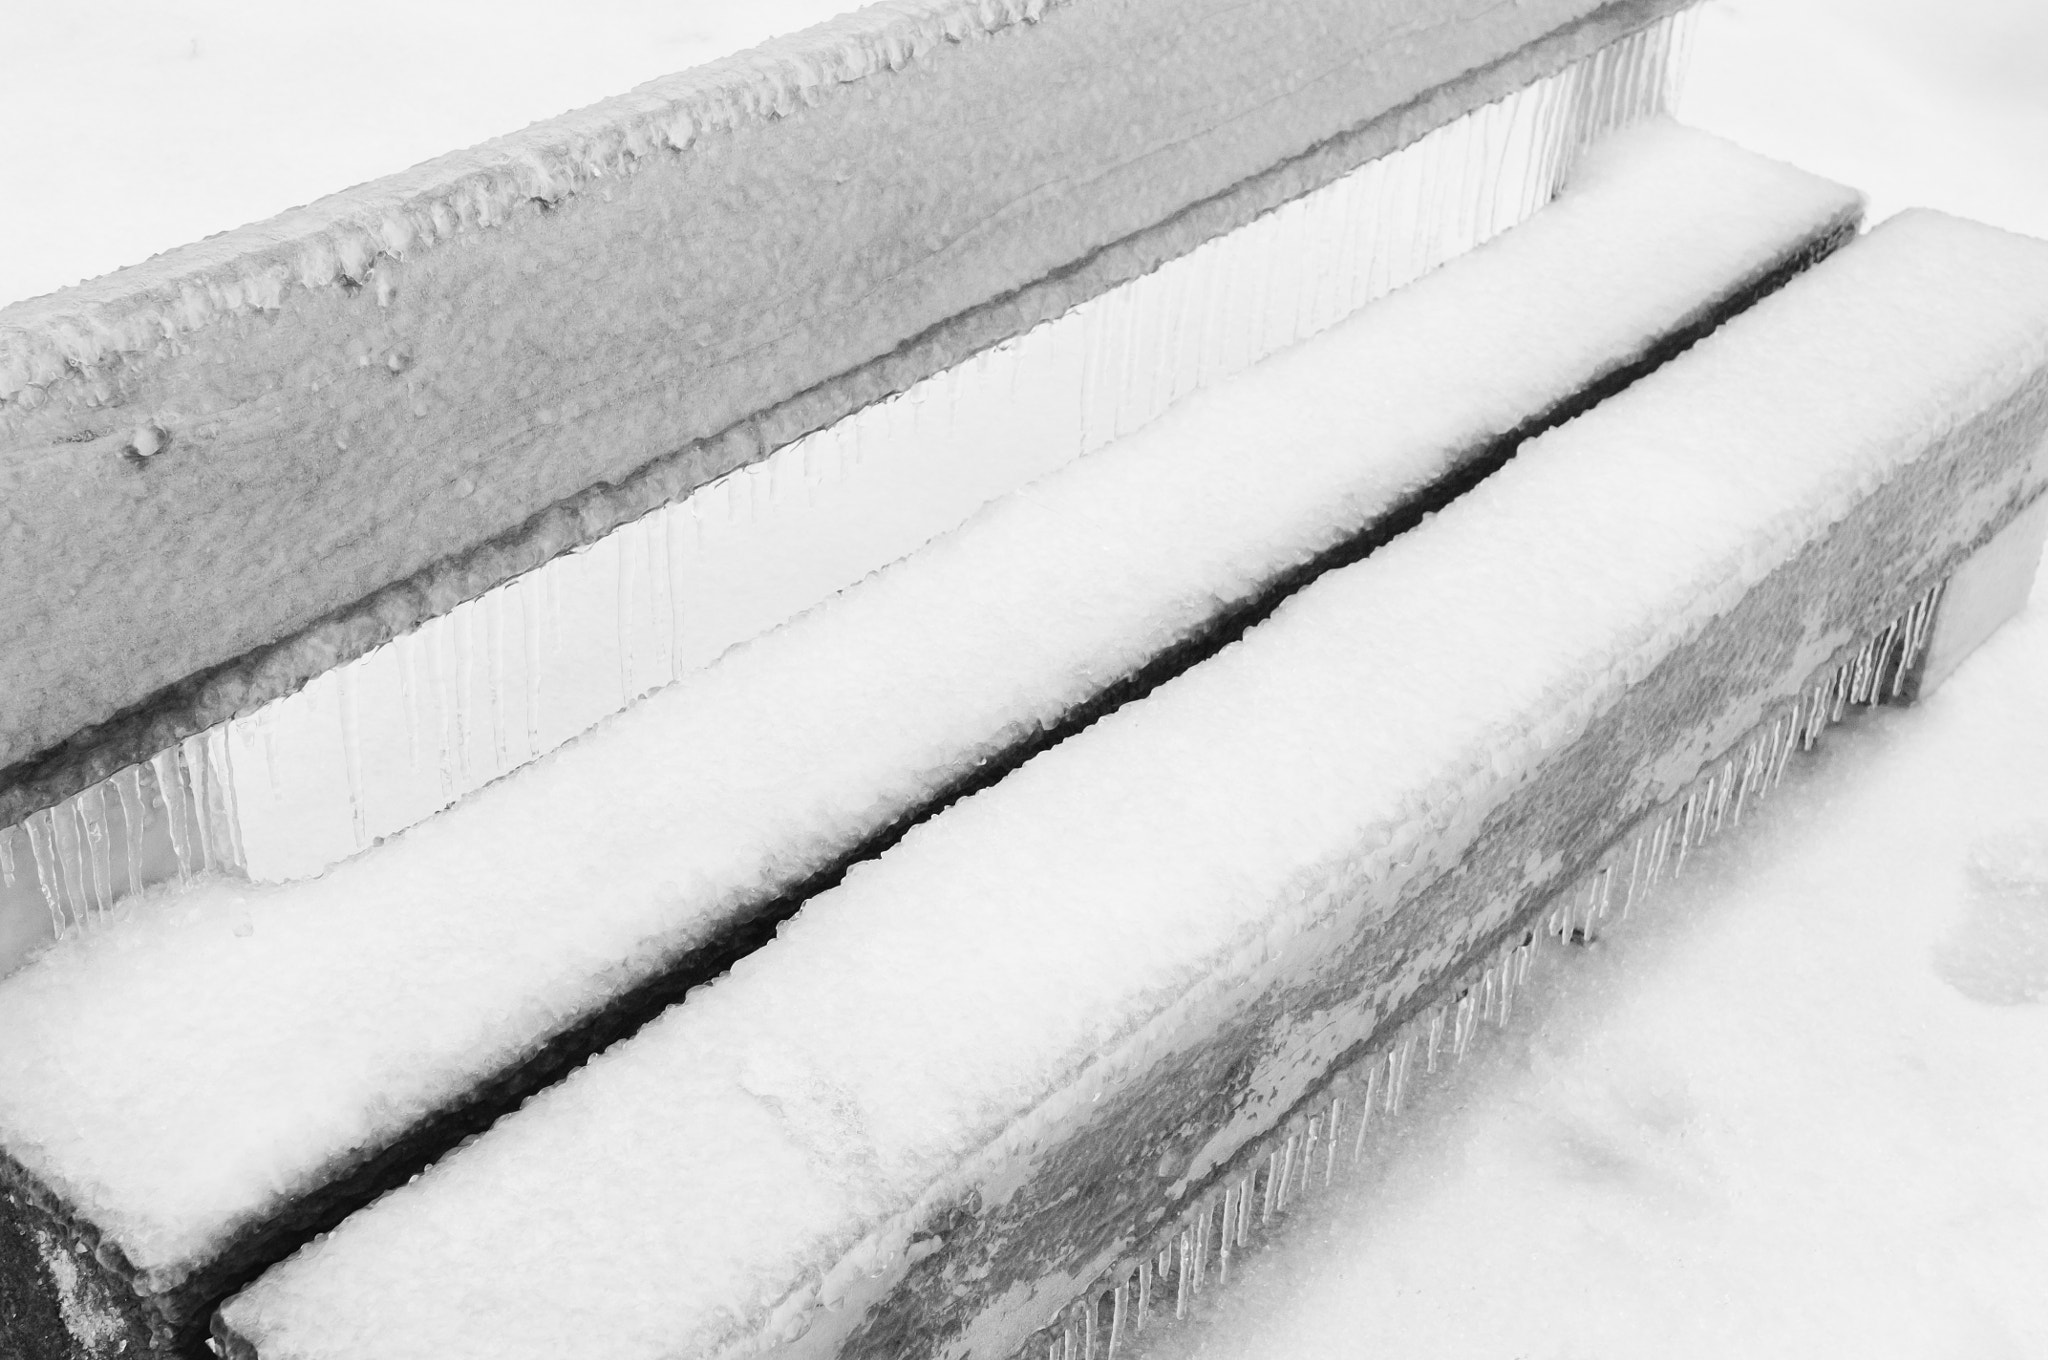 Nikon D2X sample photo. Freezing rain covered this bench in a park photography